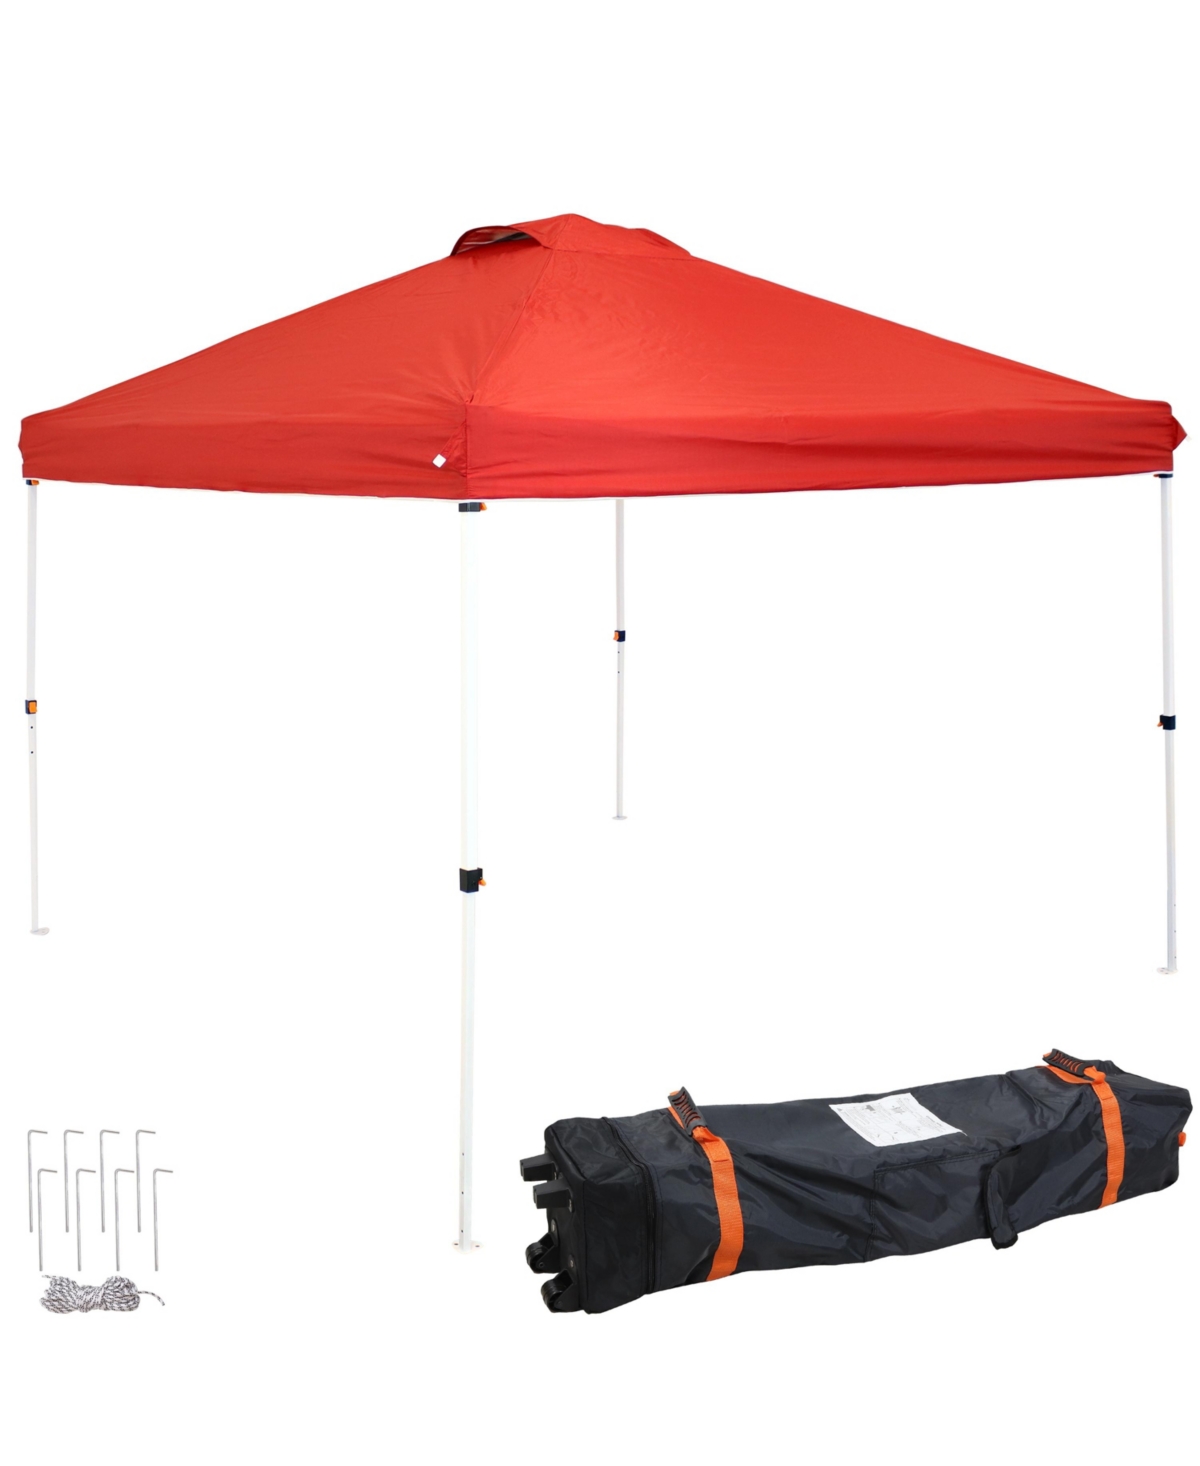 Premium Pop-Up Canopy with Rolling Bag - 12 ft x 12 ft - Red - Red